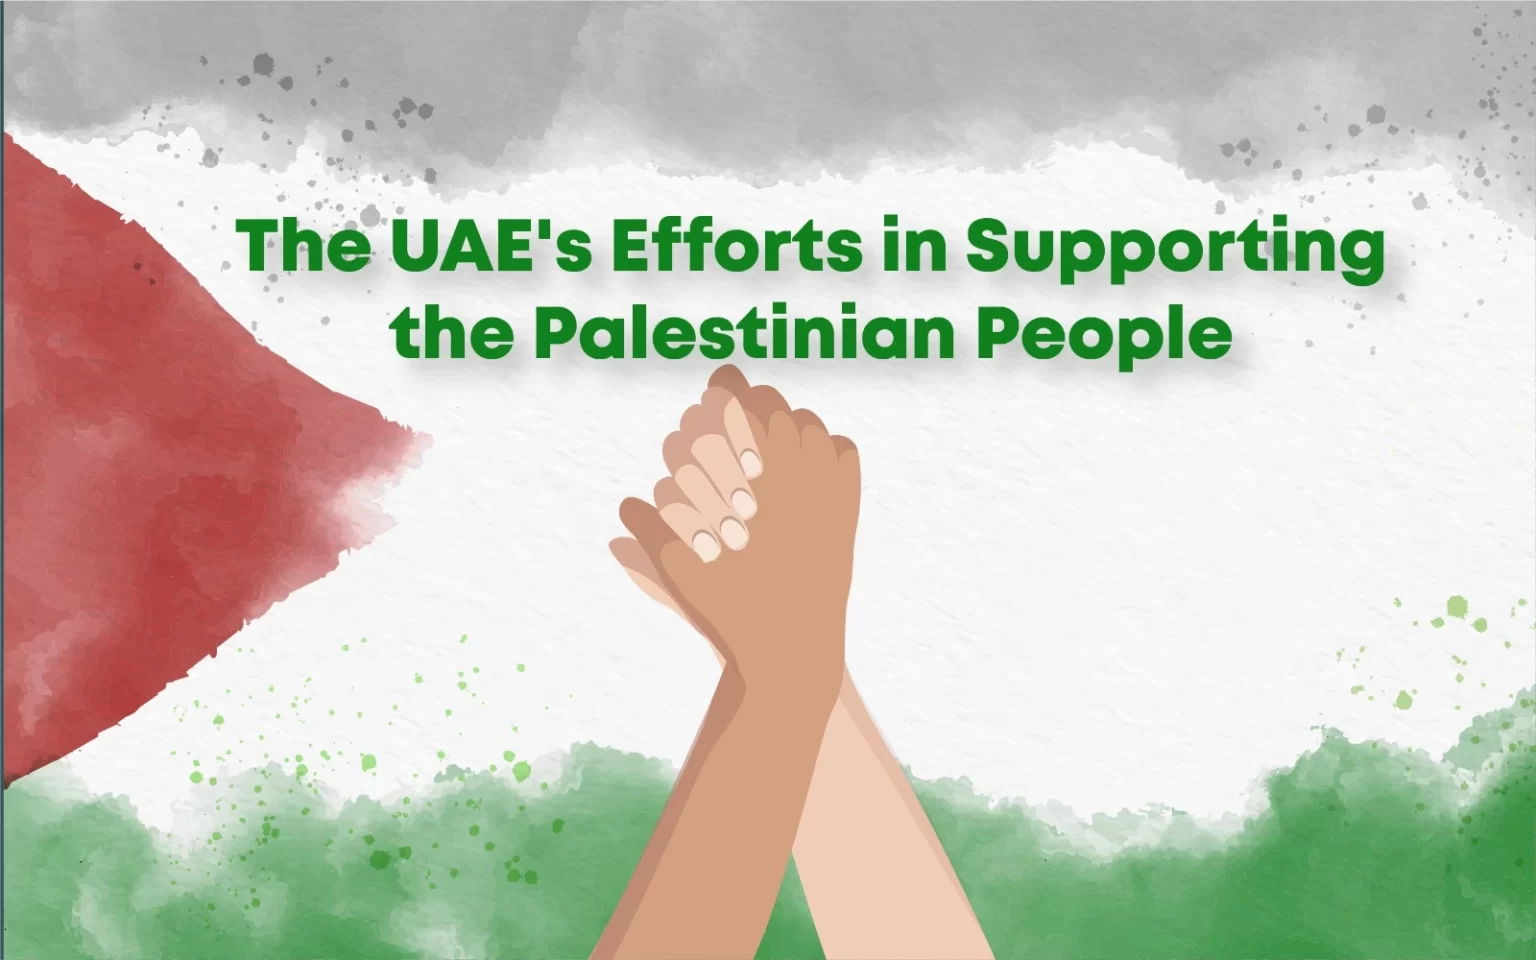 The UAE’s Efforts in Supporting the Palestinian People